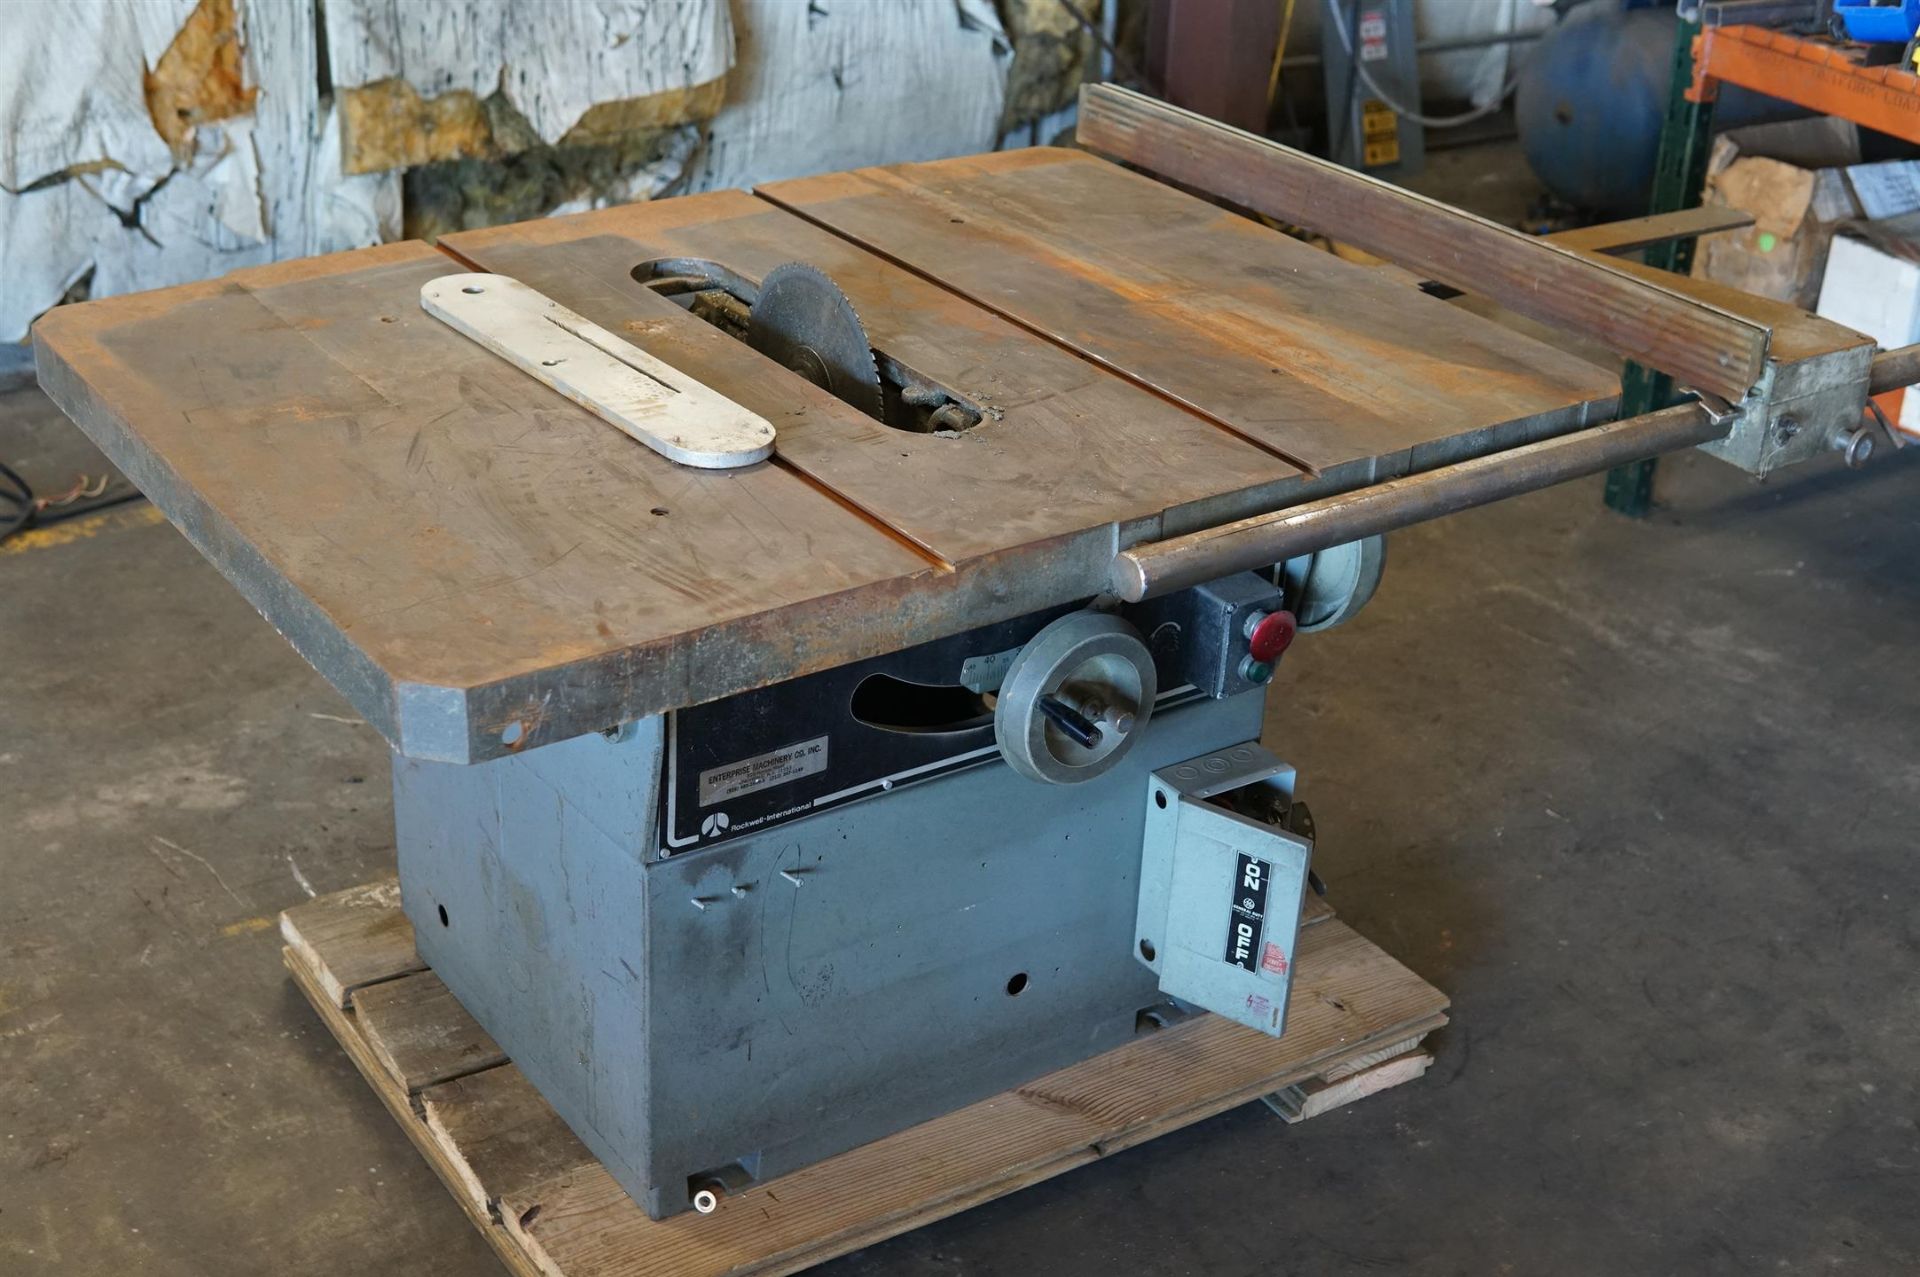 Rockwell Table Saw 34790 - (LOADING FEE - $25)